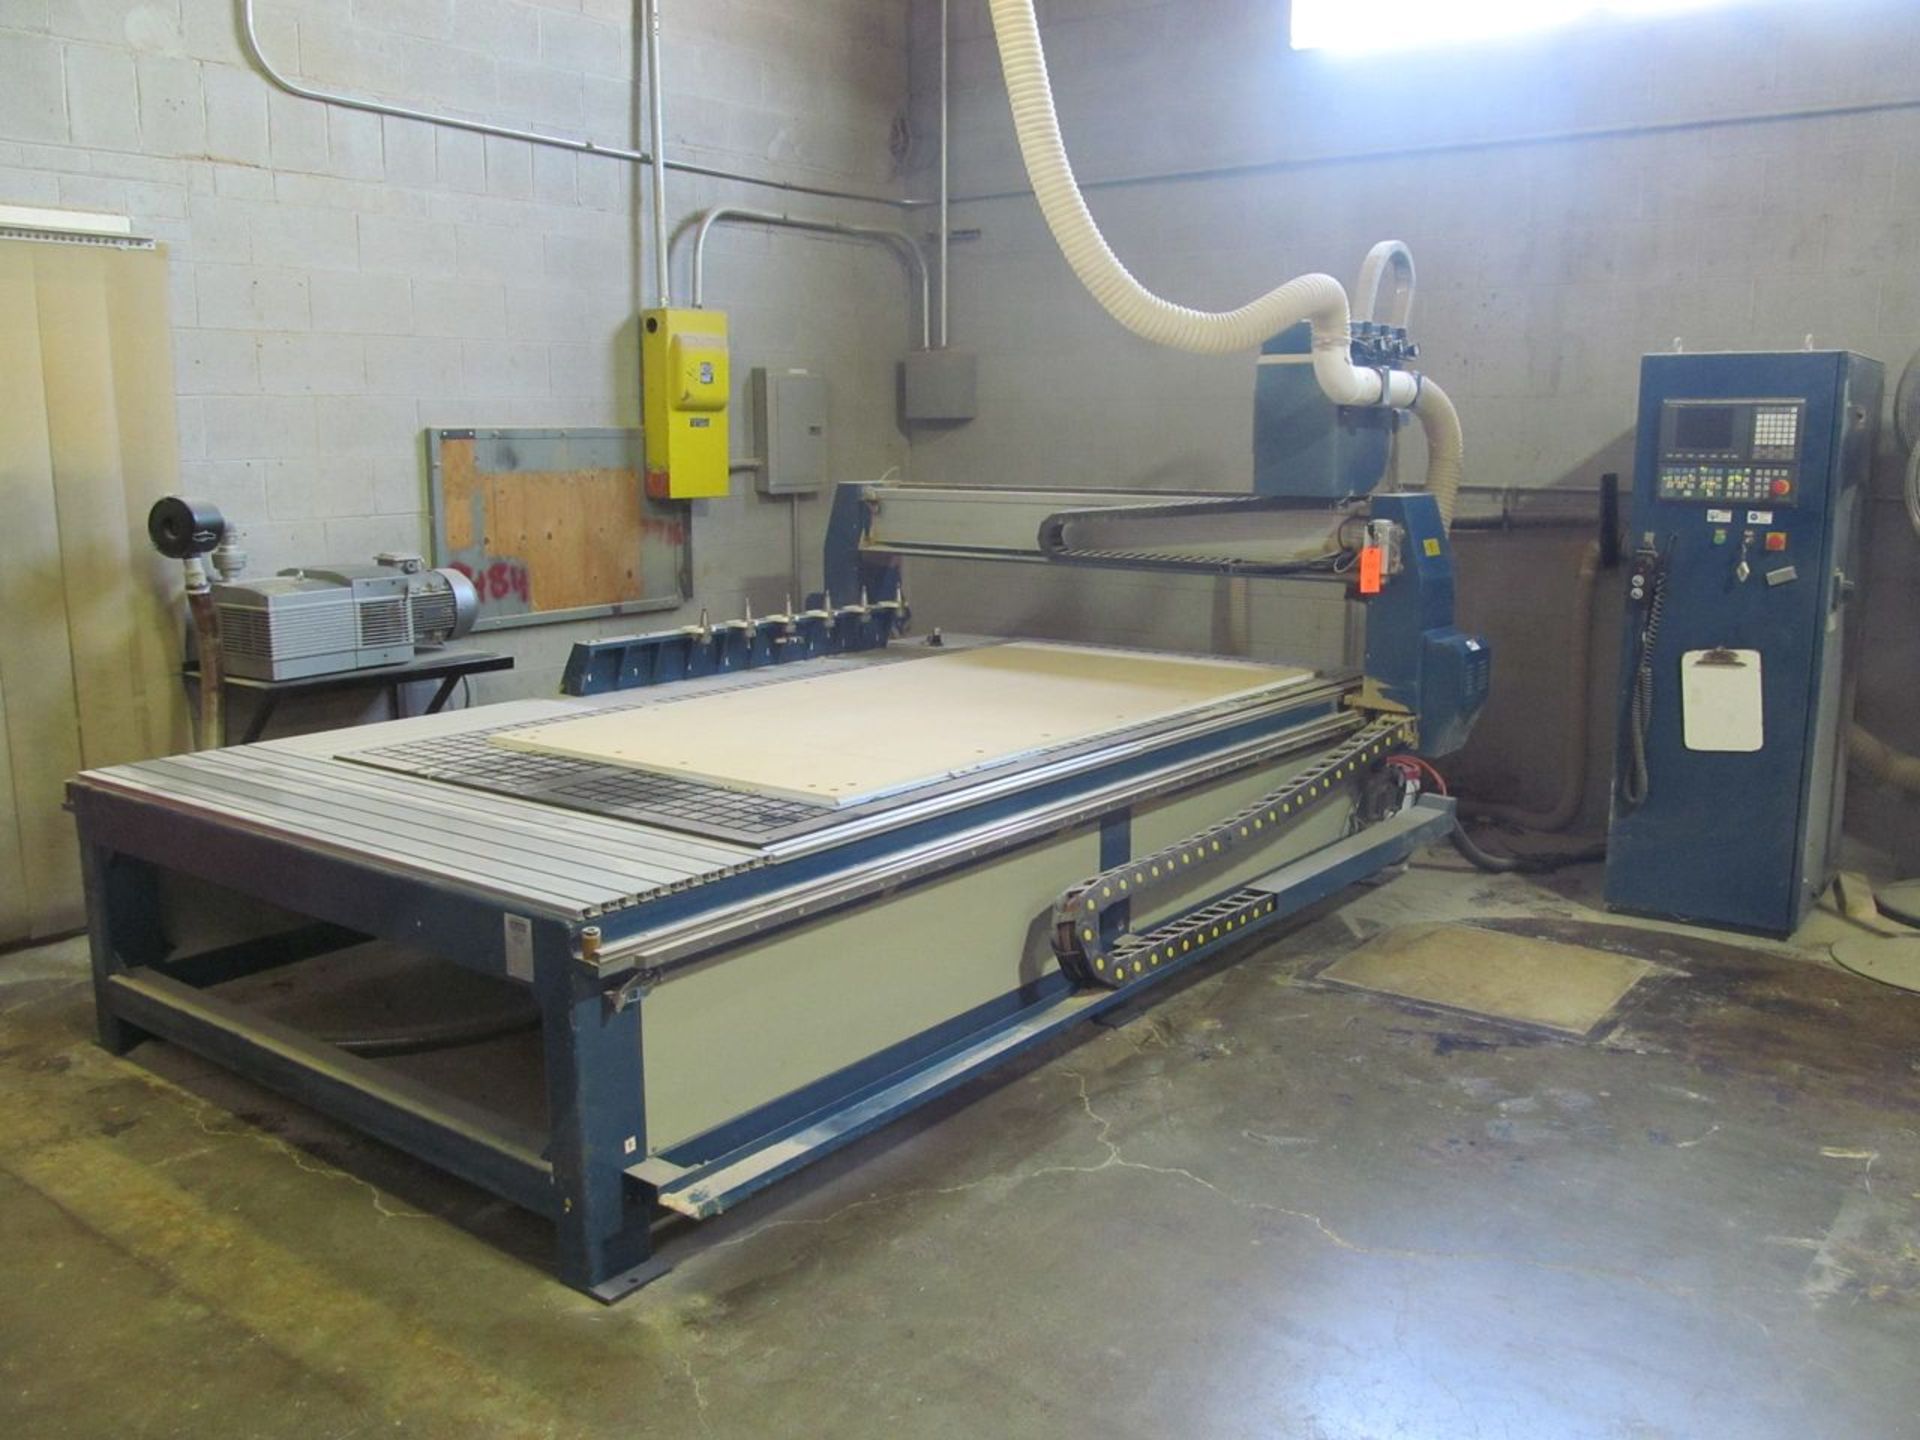 2016 - Baileigh Model WR-510ATC Single Head Bridge-Type CNC Router, S/N: F160501; with 5 ft. x 10